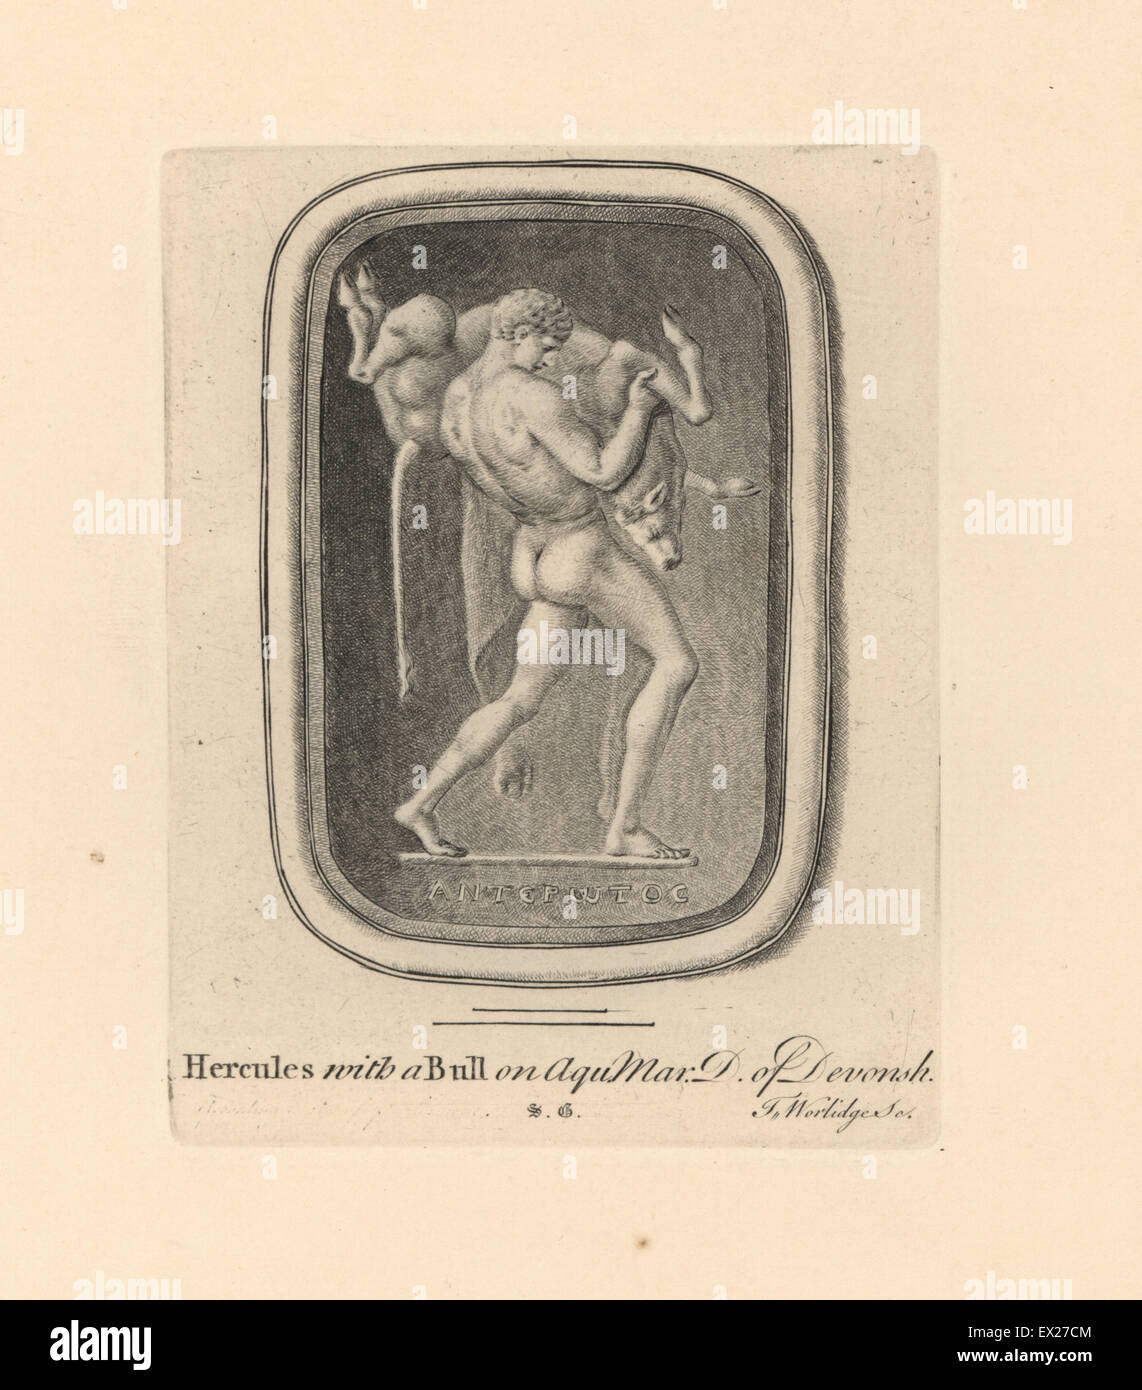 Hercules, Greek mythical hero, defeating the Cretan bull, on aquamarine in the Duke of Devonshire's collection. Copperplate engraving by Thomas Worlidge from James Vallentin's One Hundred and Eight Engravings from Antique Gems, 1863. Stock Photo